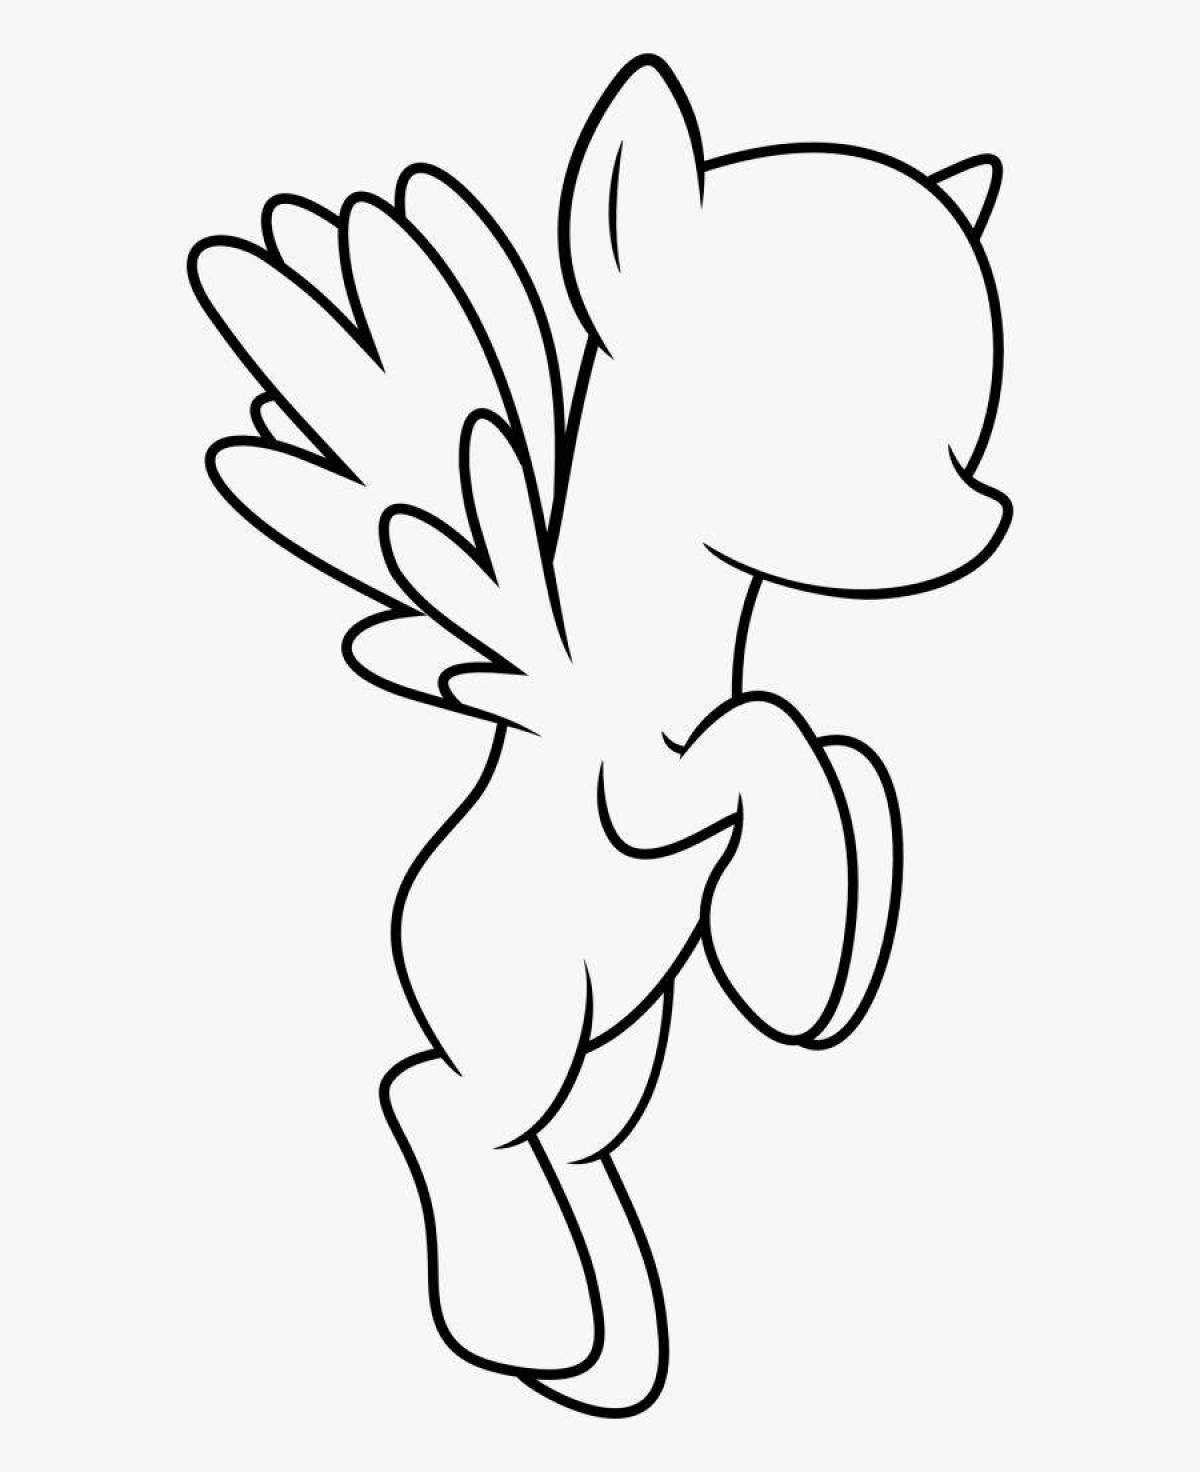 Charming pony mannequin coloring page